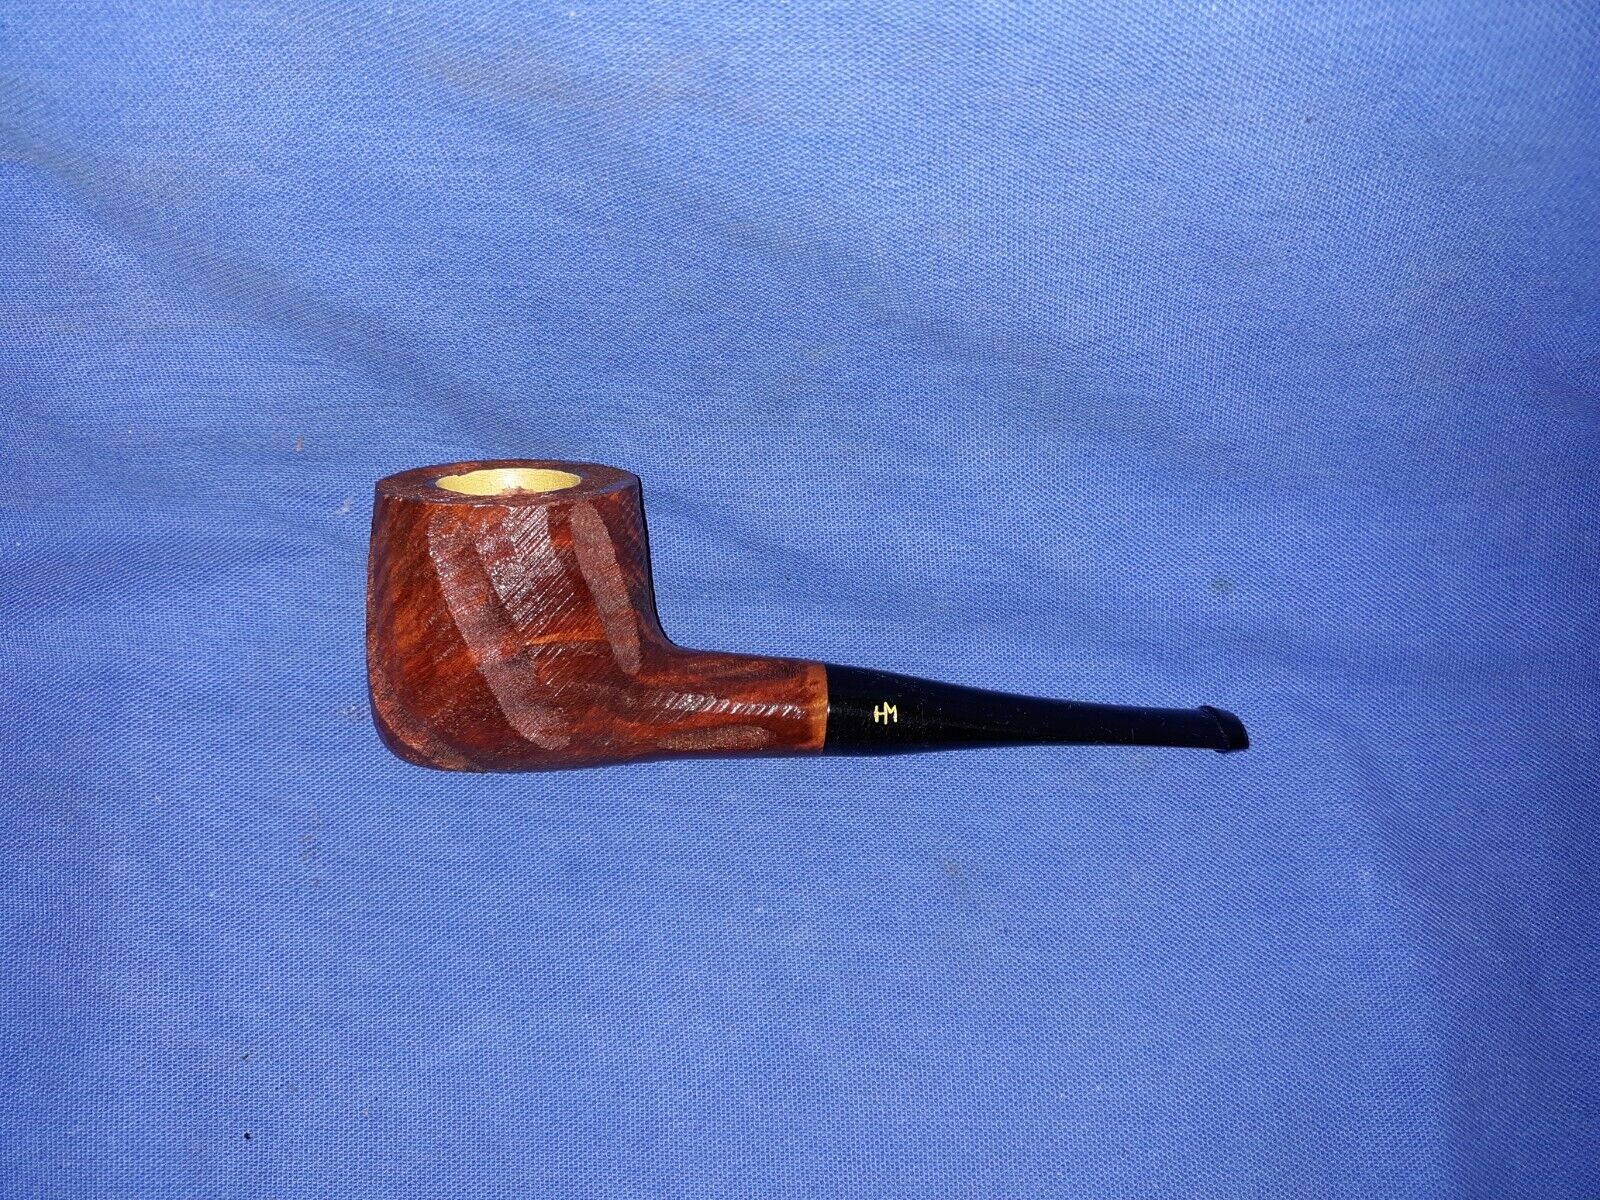 Vintage Yello Bole Hand Made Pipe Unsmoked Or Little Smoked  Near  Mint...